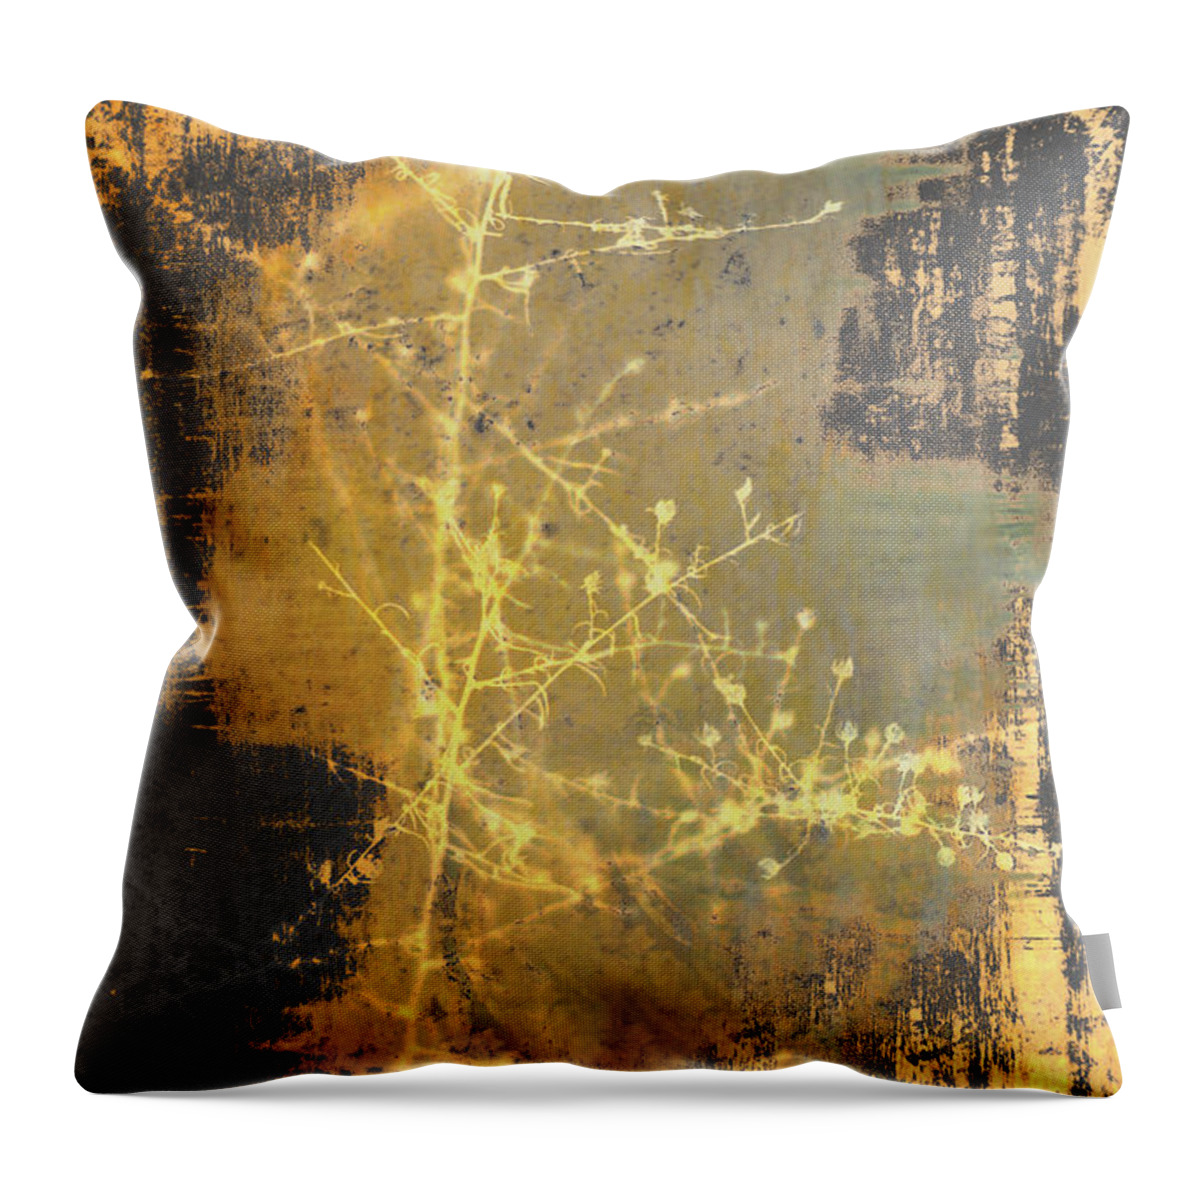 Gold Christmas Tree Throw Pillow featuring the photograph Gold Industrial Abstract Christmas Tree by Suzanne Powers